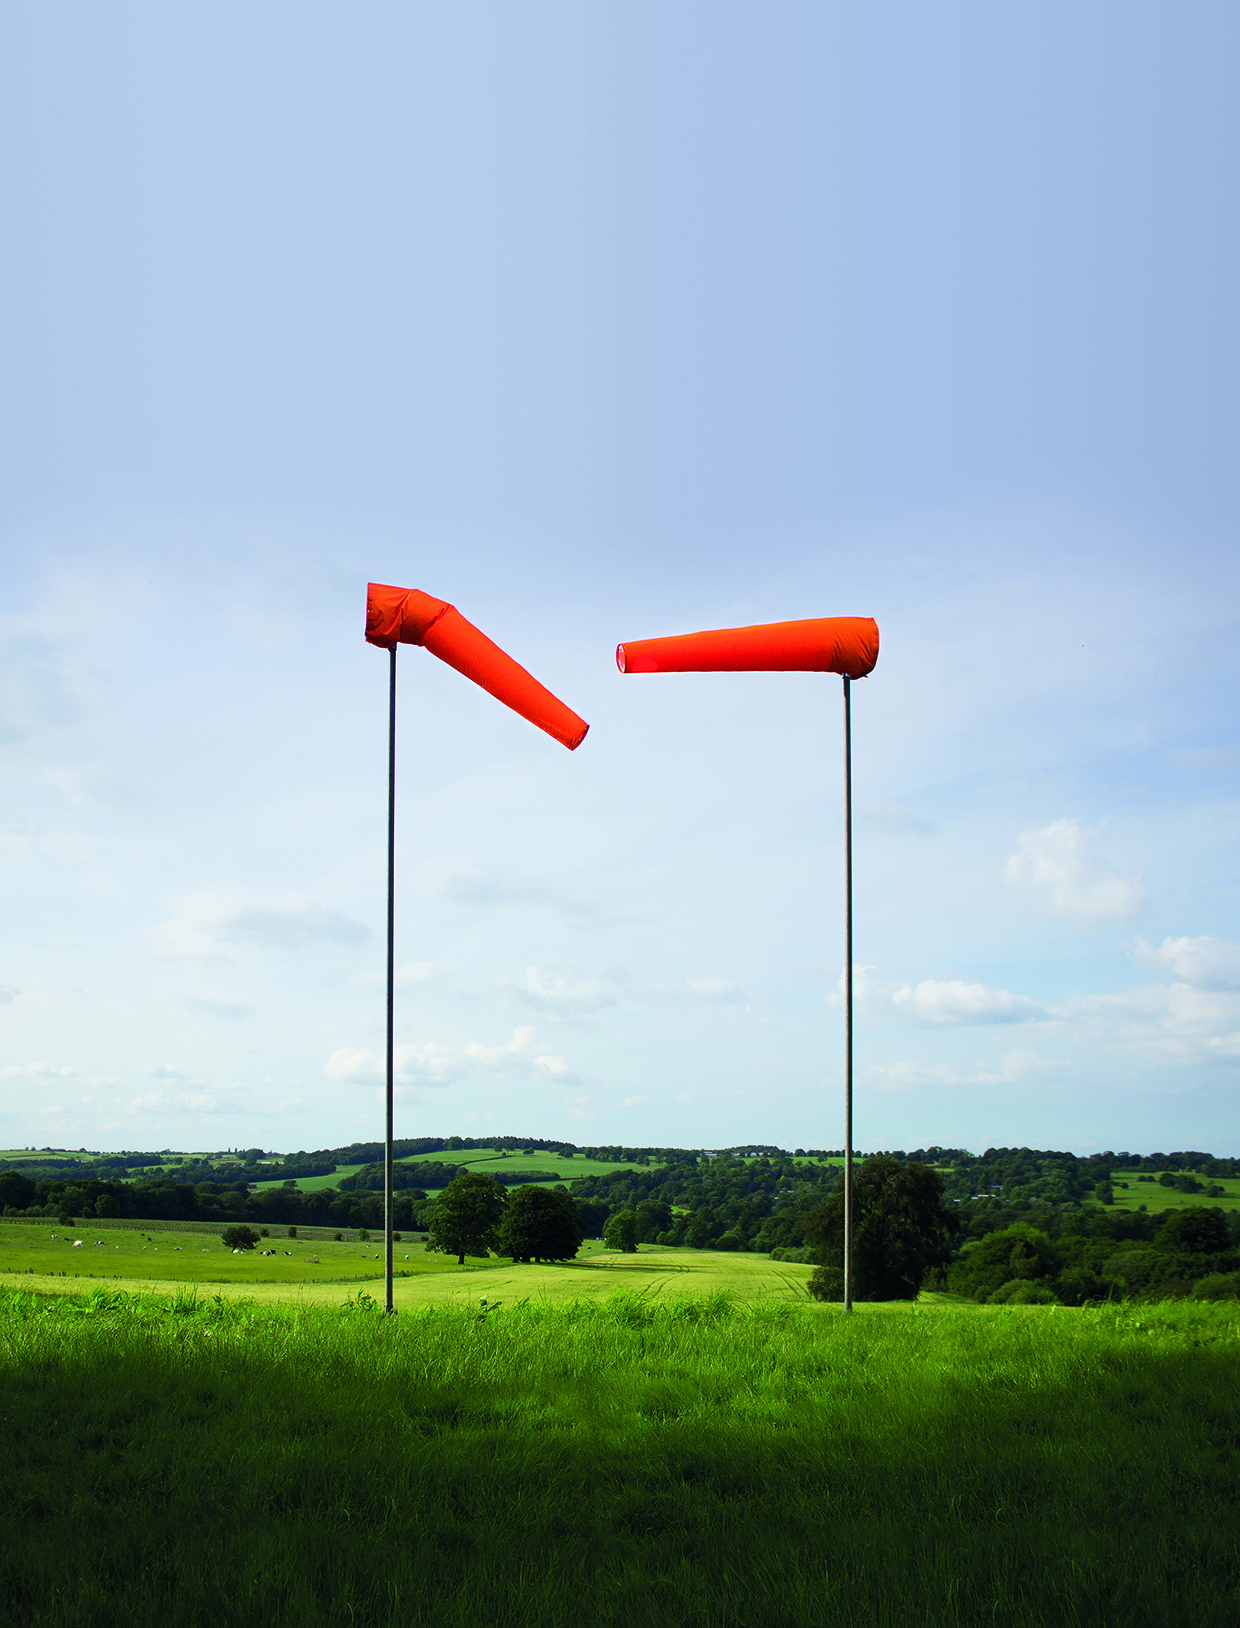 Two wind socks blowing towards each other standing on green grass with a blue sky in the background.